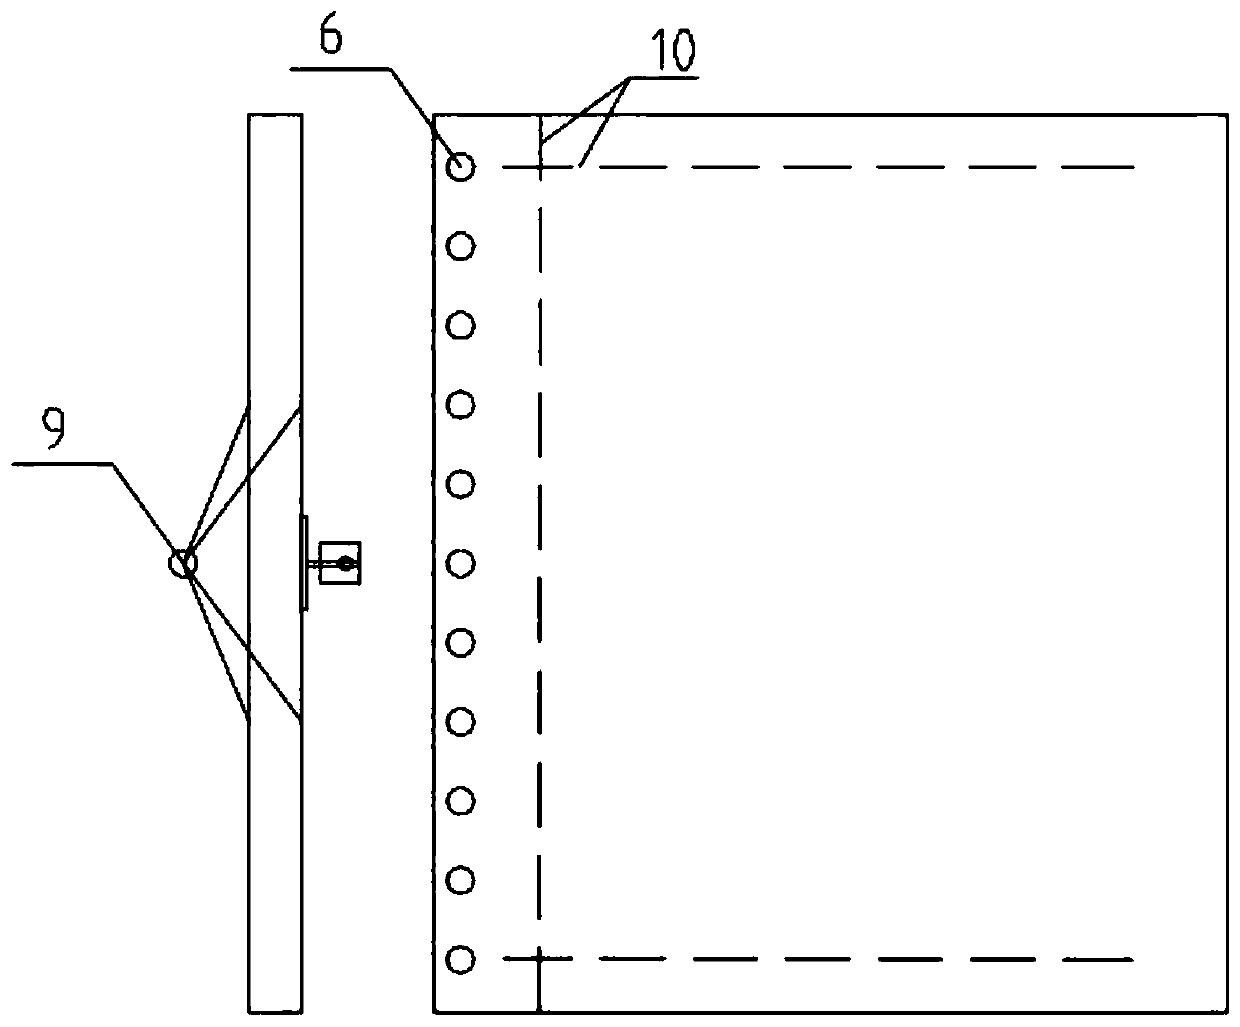 Mounting method for prefabricated parts based on strong light laser positioning technology